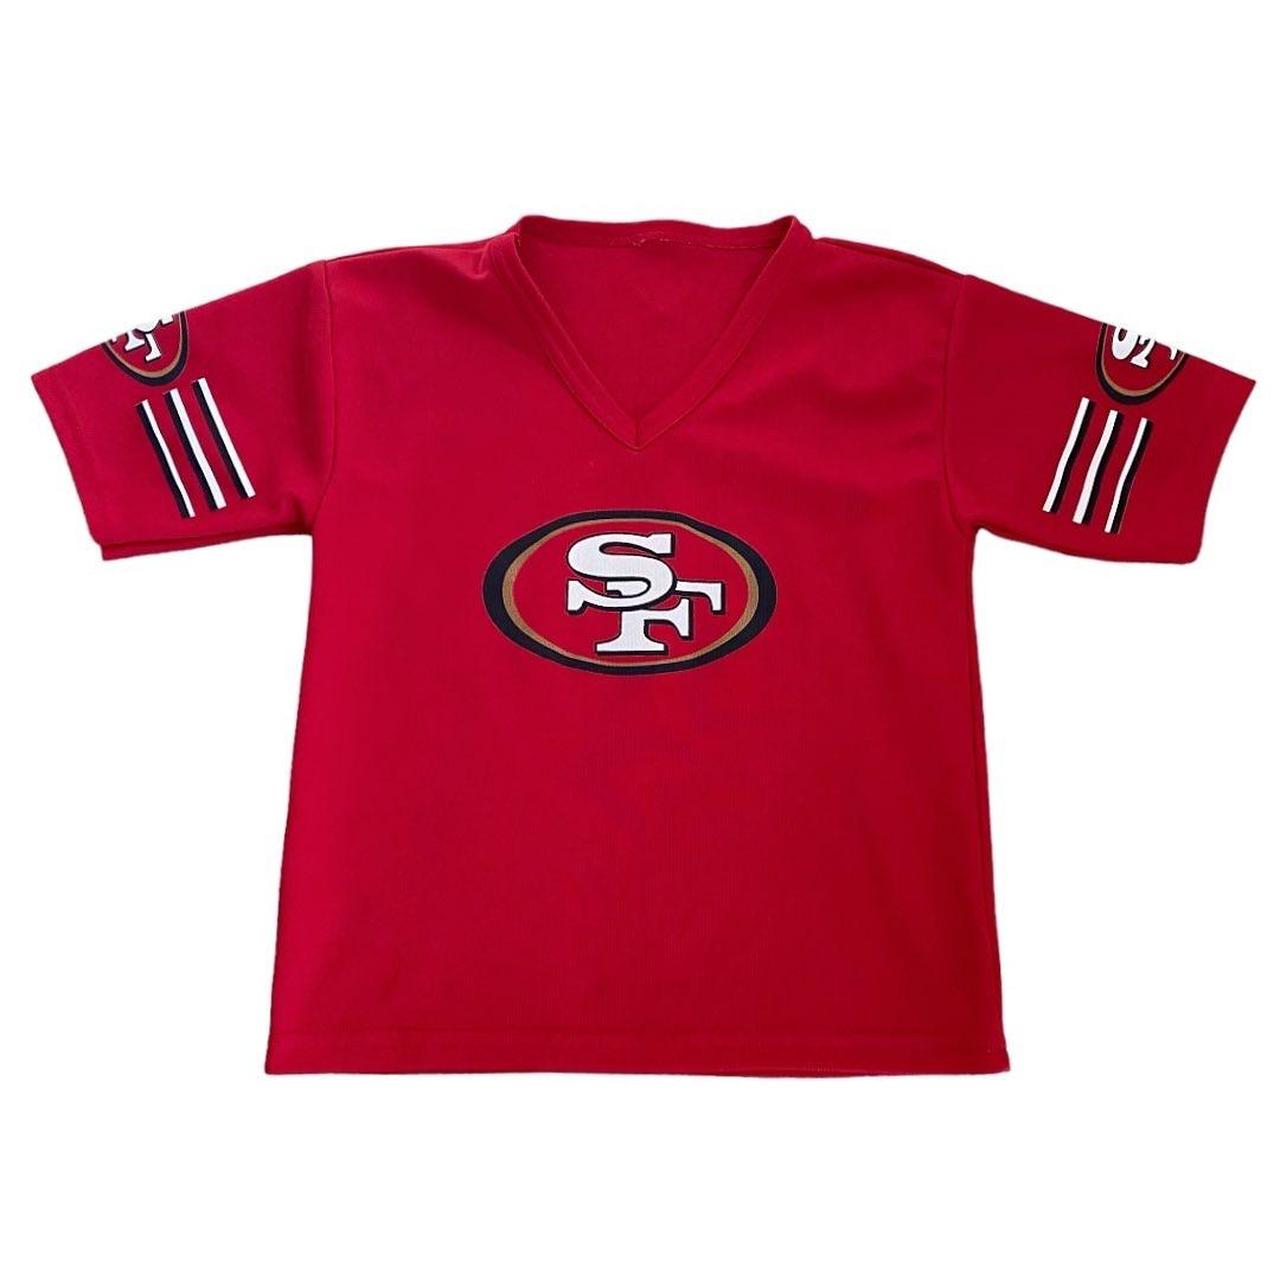 youth jersey 49ers